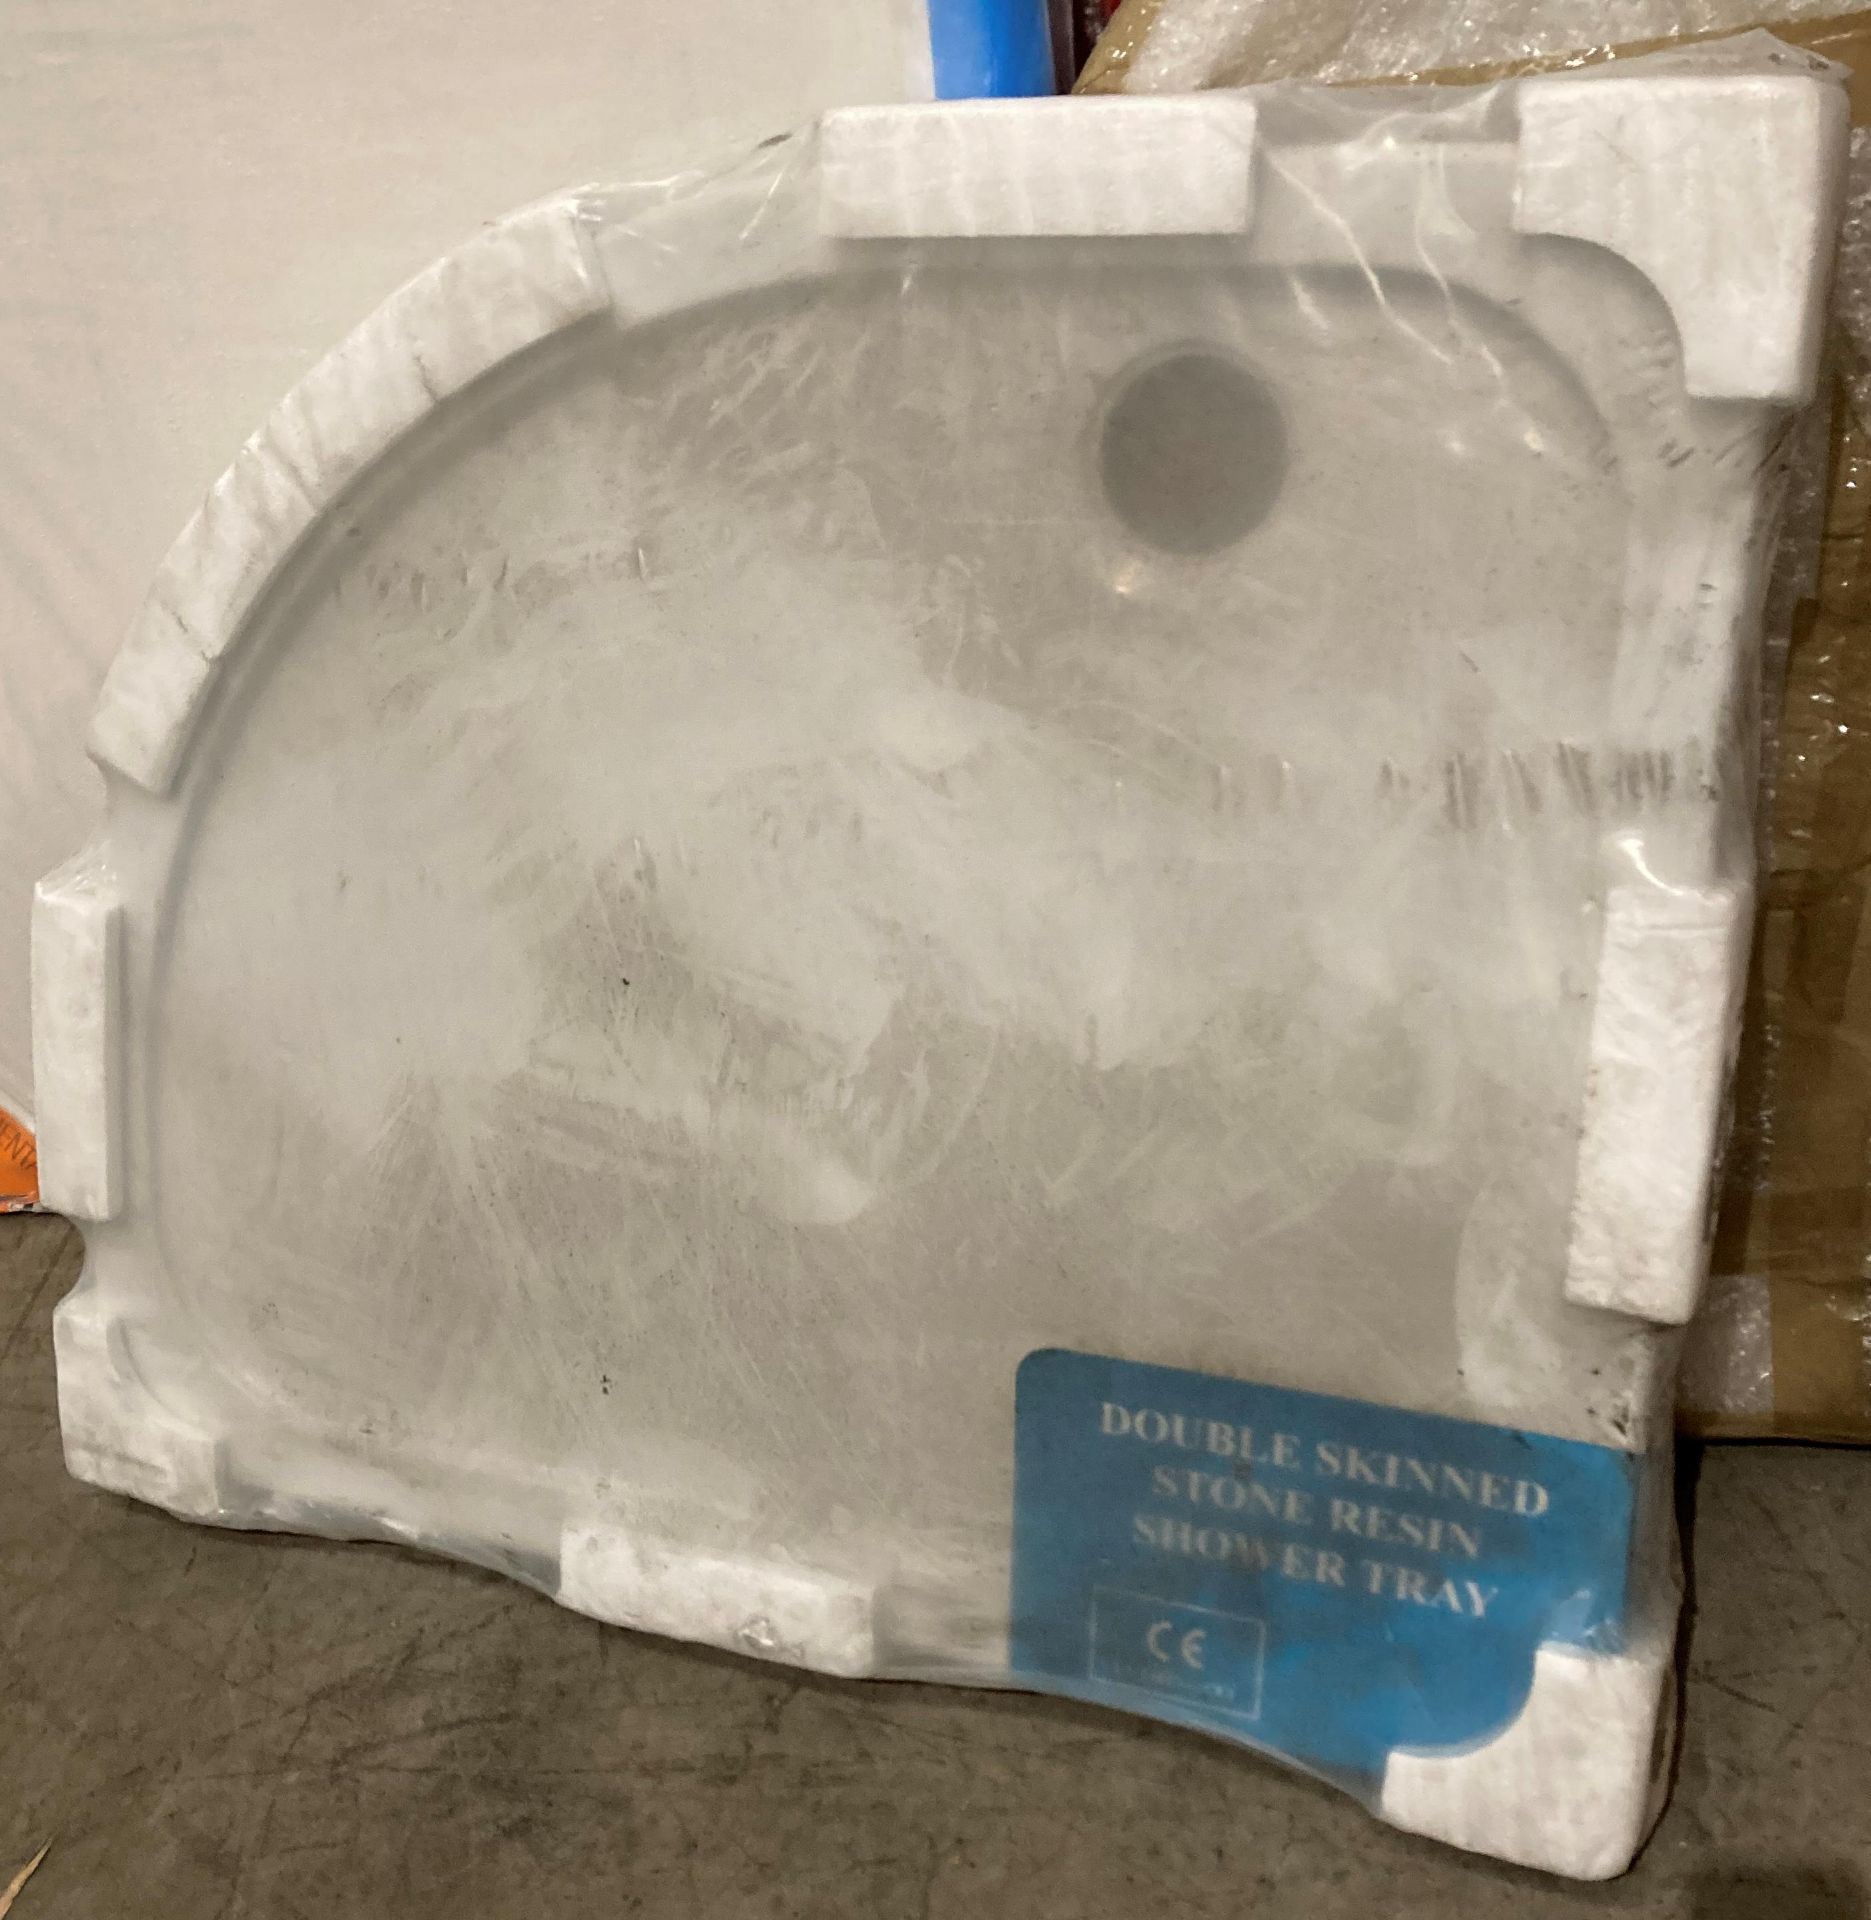 Double skinned stone resin shower tray 900 x 800mm (saleroom location: RB)